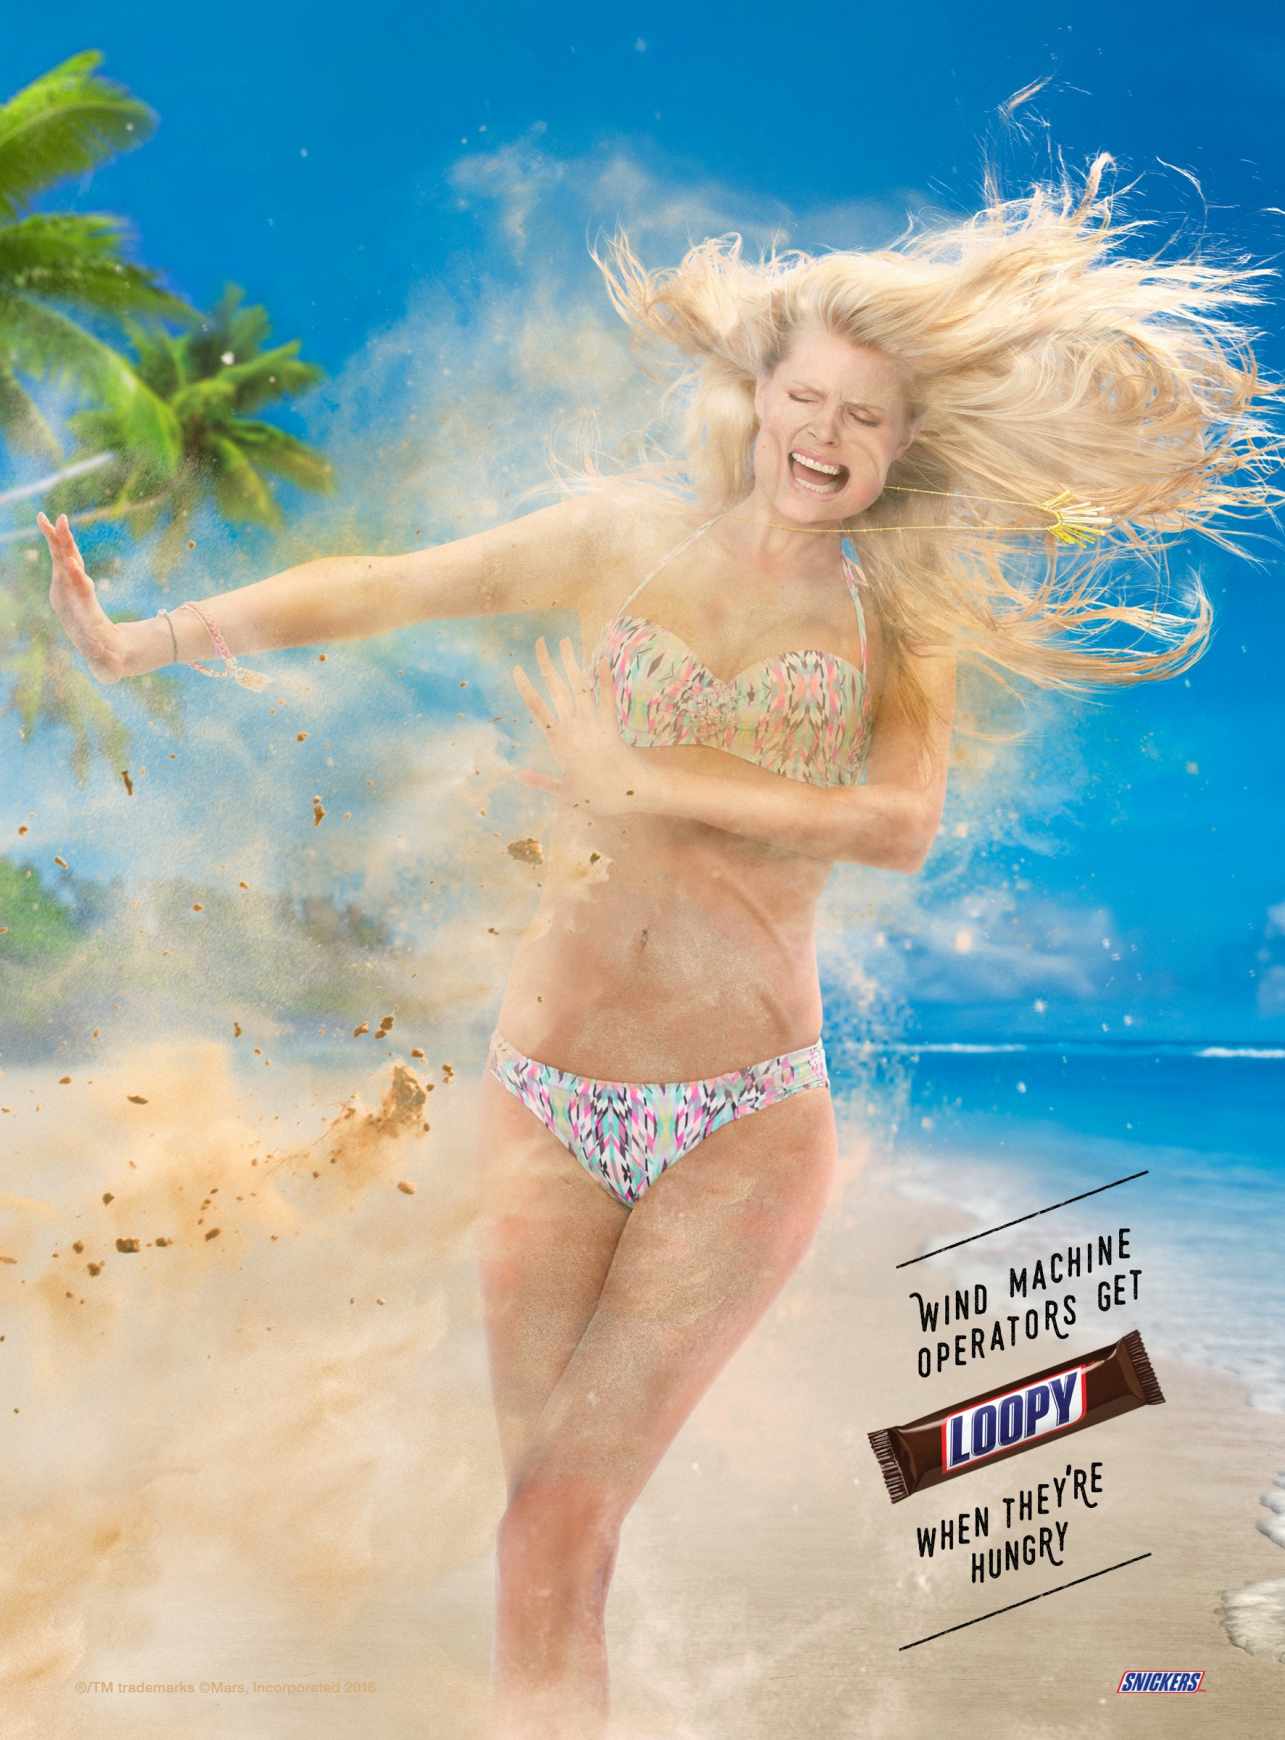 Snickers: Photo retouchers get confused when they're hungry Campaigns of the World®